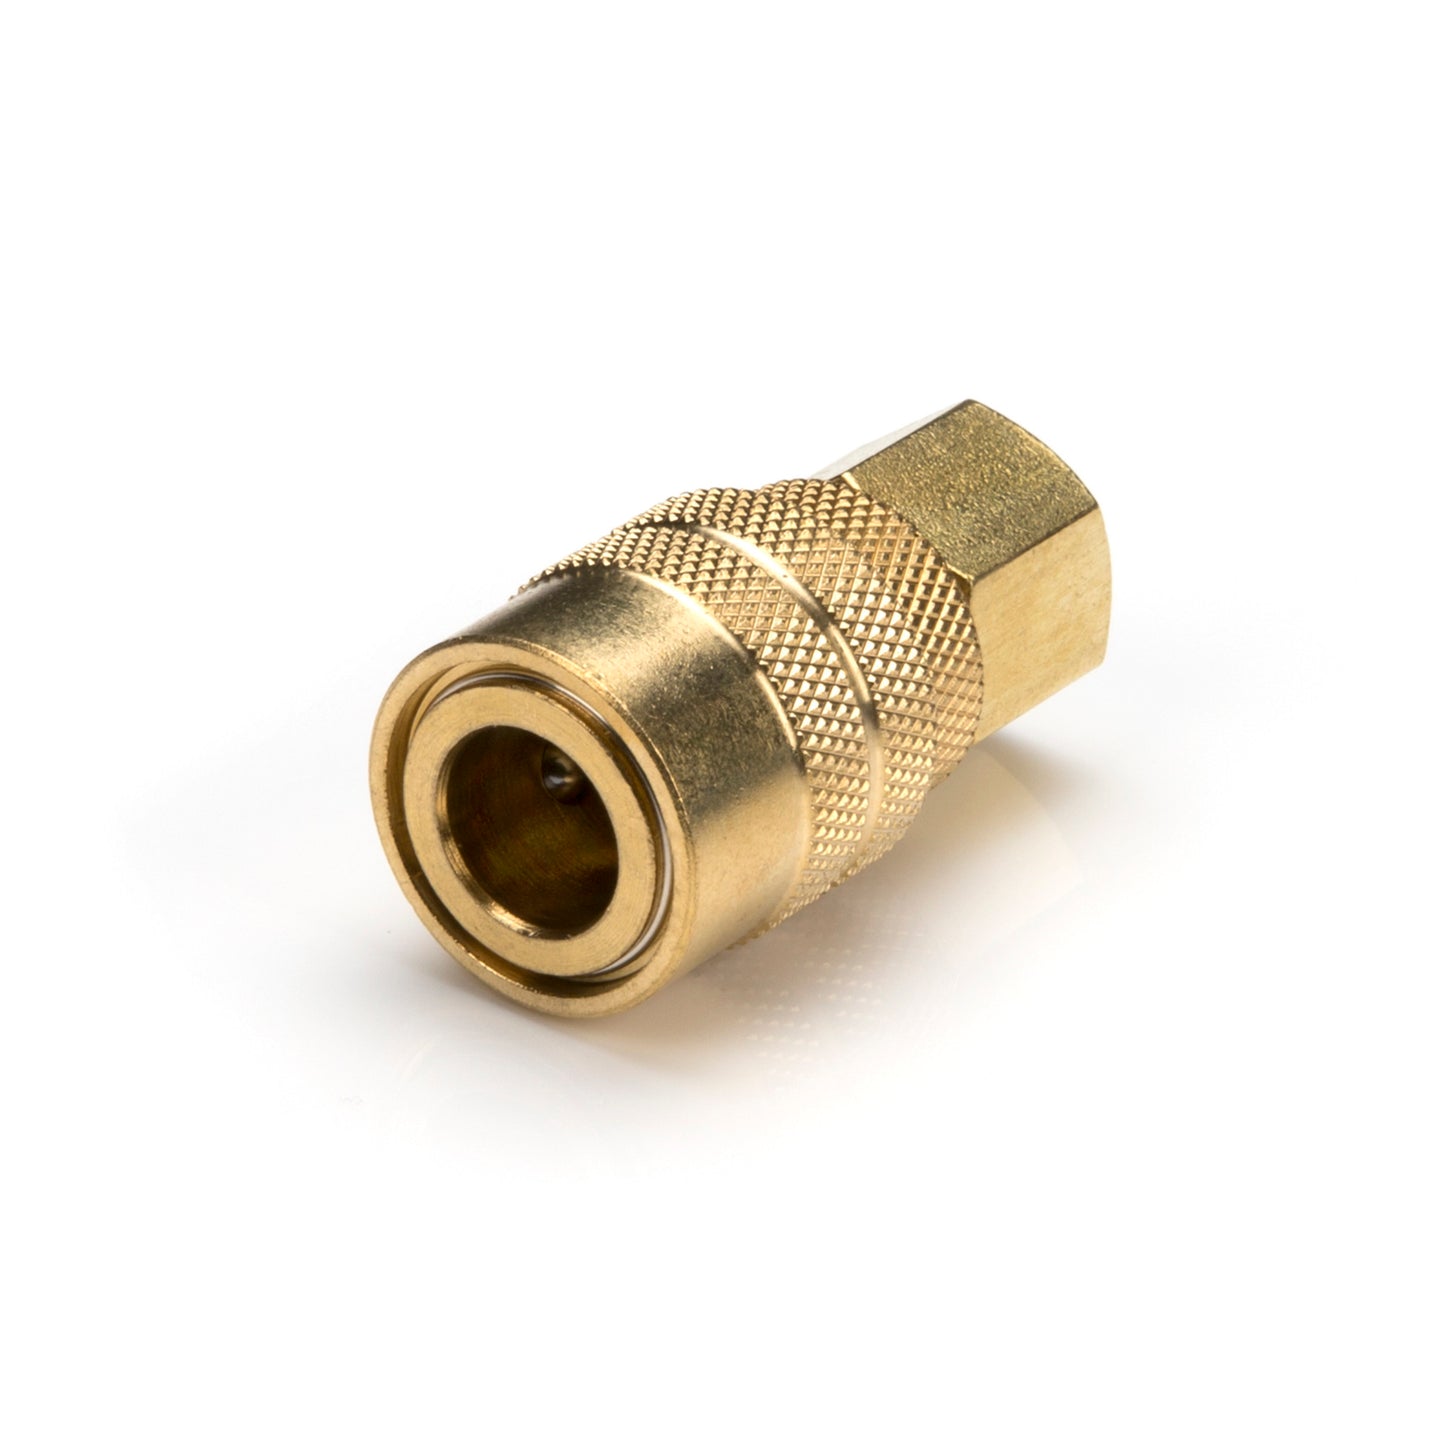 20-Piece 1/4-Inch NPT Solid Brass Coupler and Steel Plug Pack